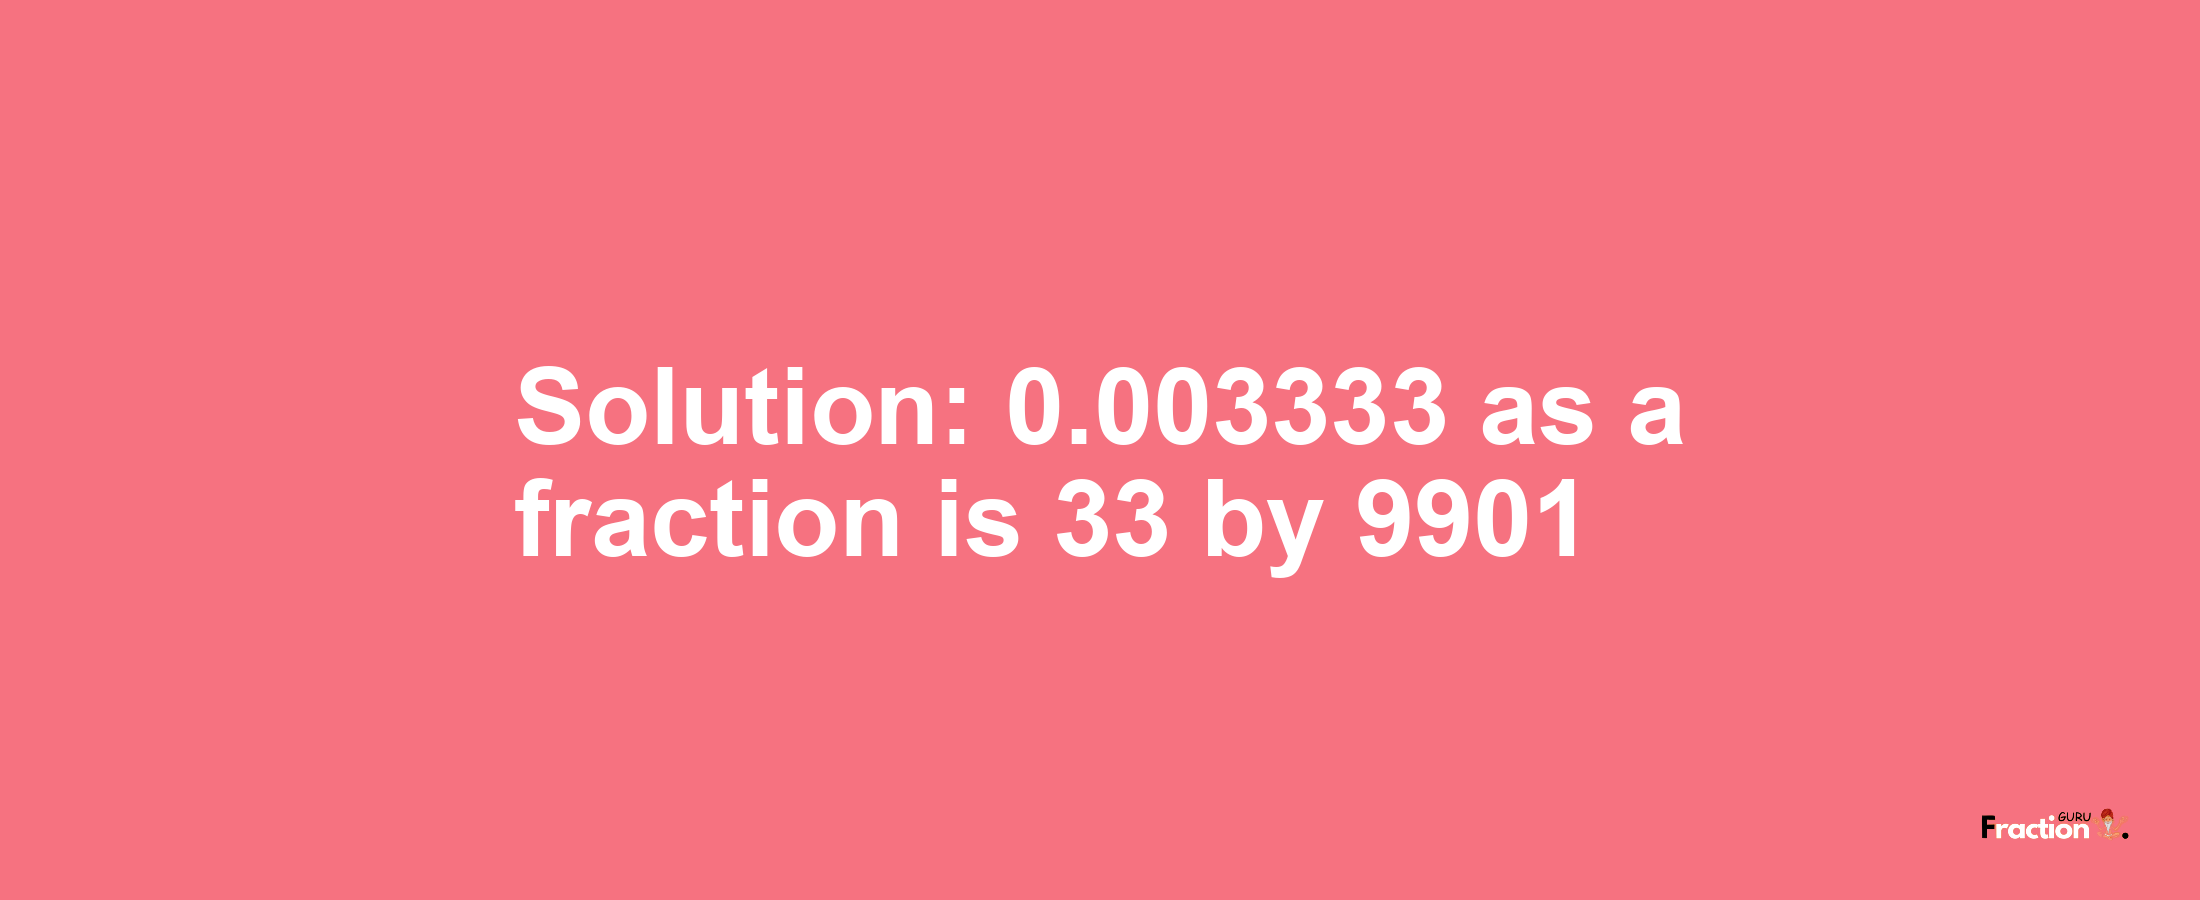 Solution:0.003333 as a fraction is 33/9901